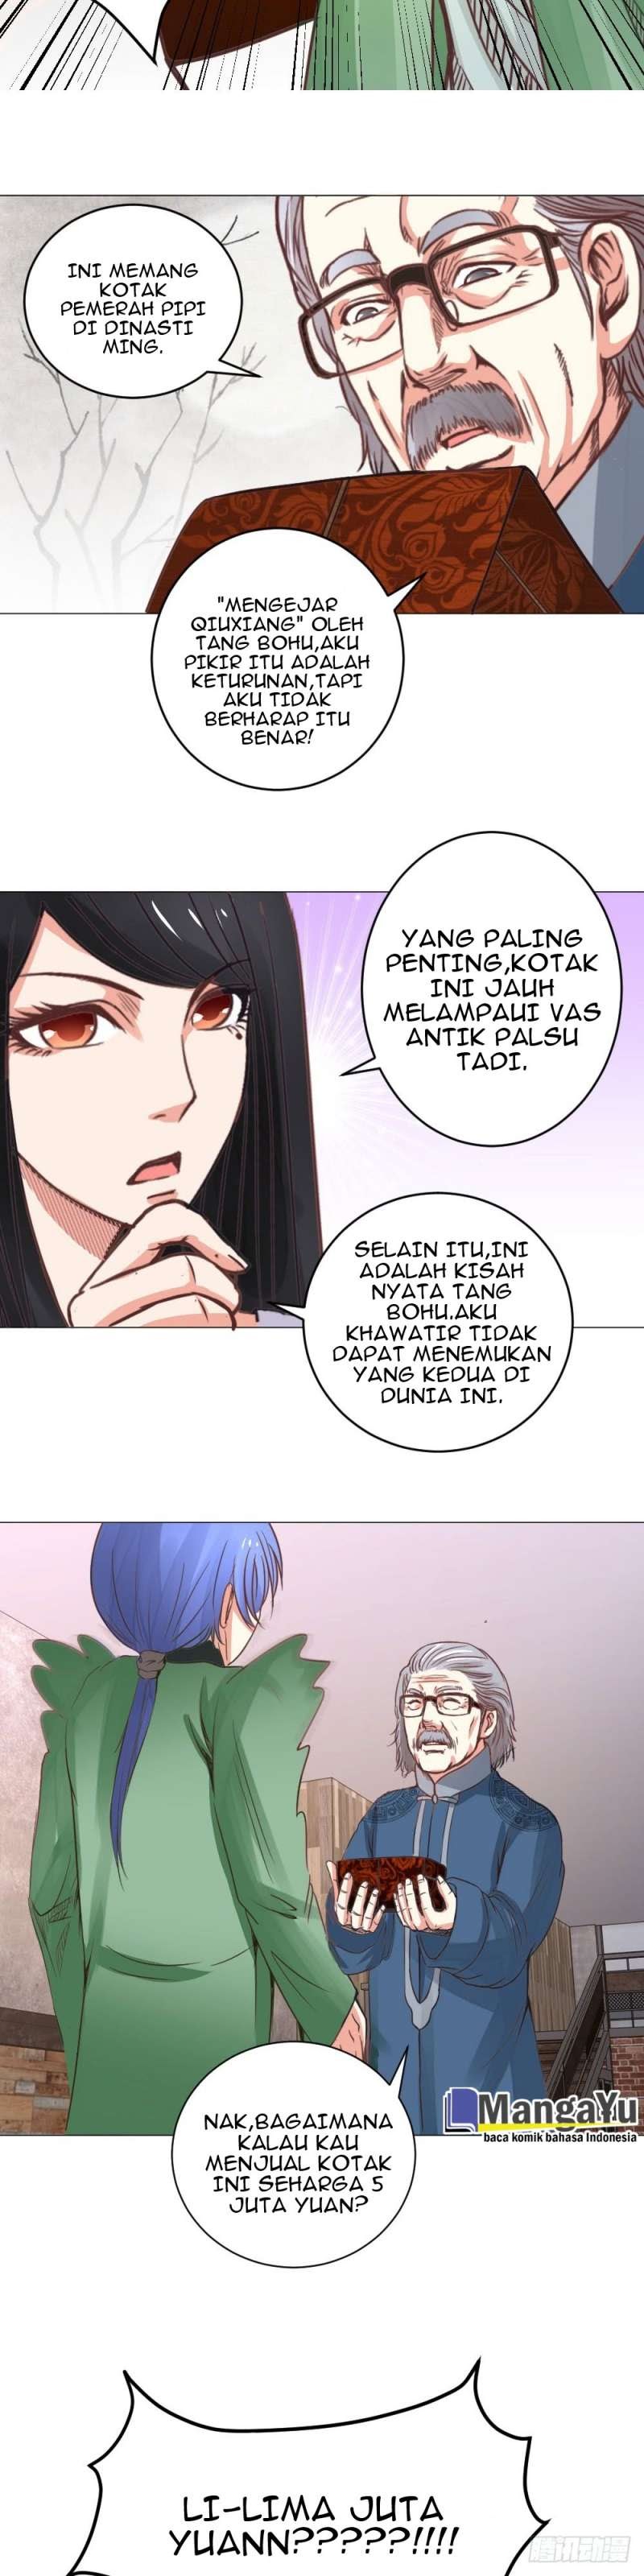 Perspective Medical Saint Chapter 10 8